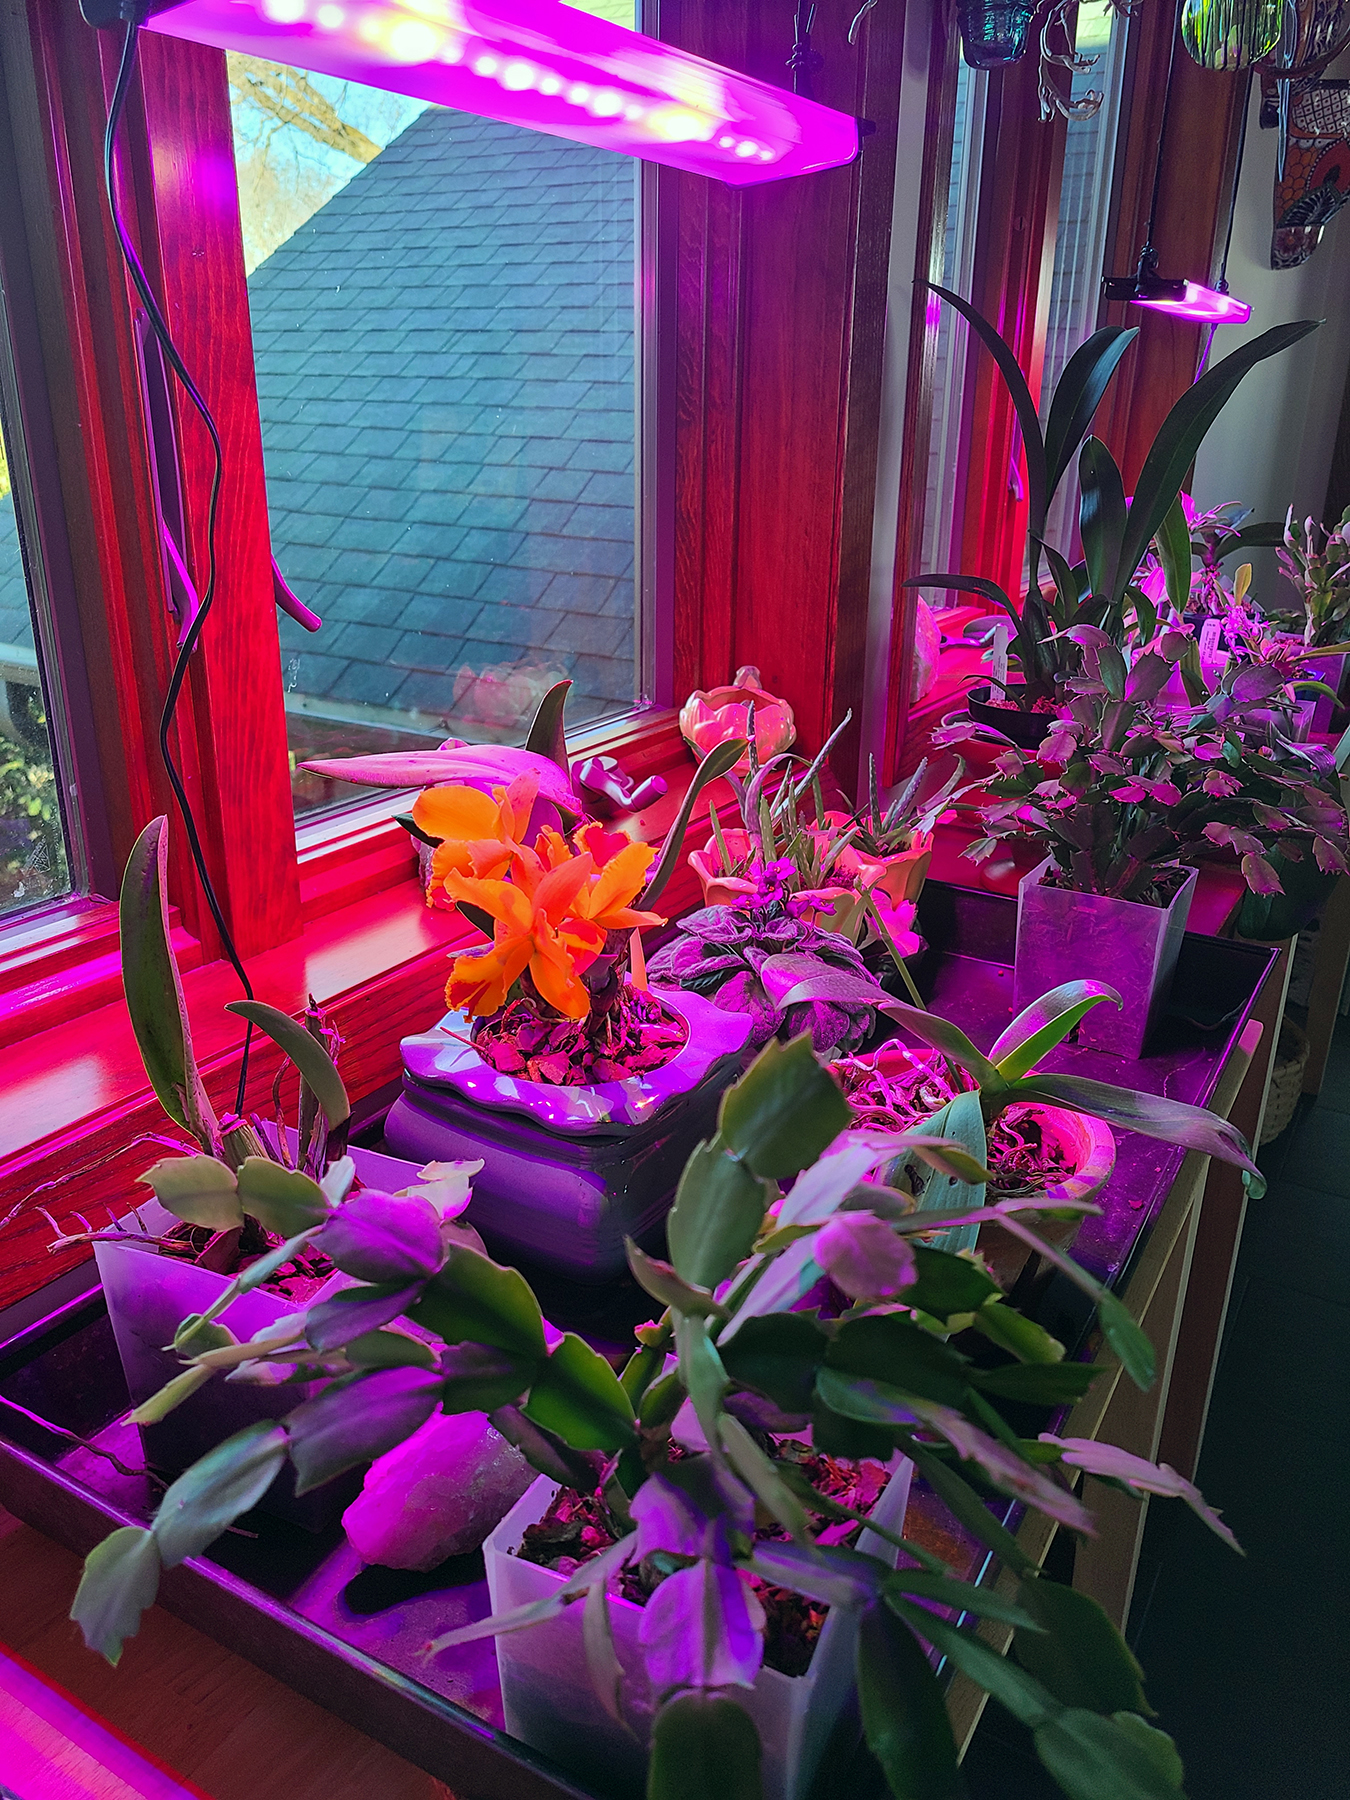 How To Provide More Light For Indoor Plants